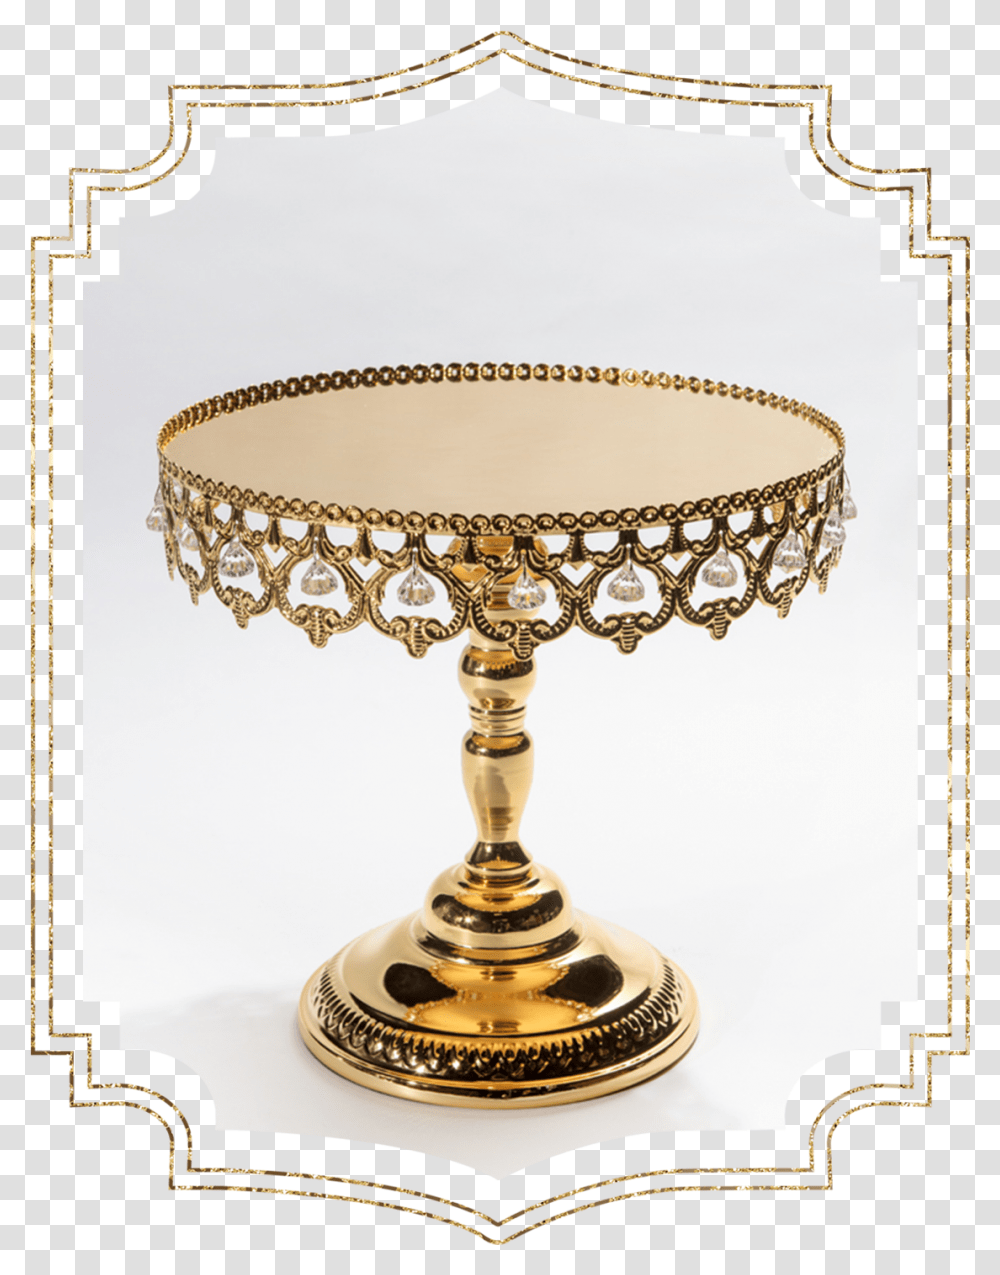 Shiny Crown Gold Cake Stand Crown Gold Cupcake Cake Stand Gold, Lampshade, Table Lamp, Accessories, Accessory Transparent Png